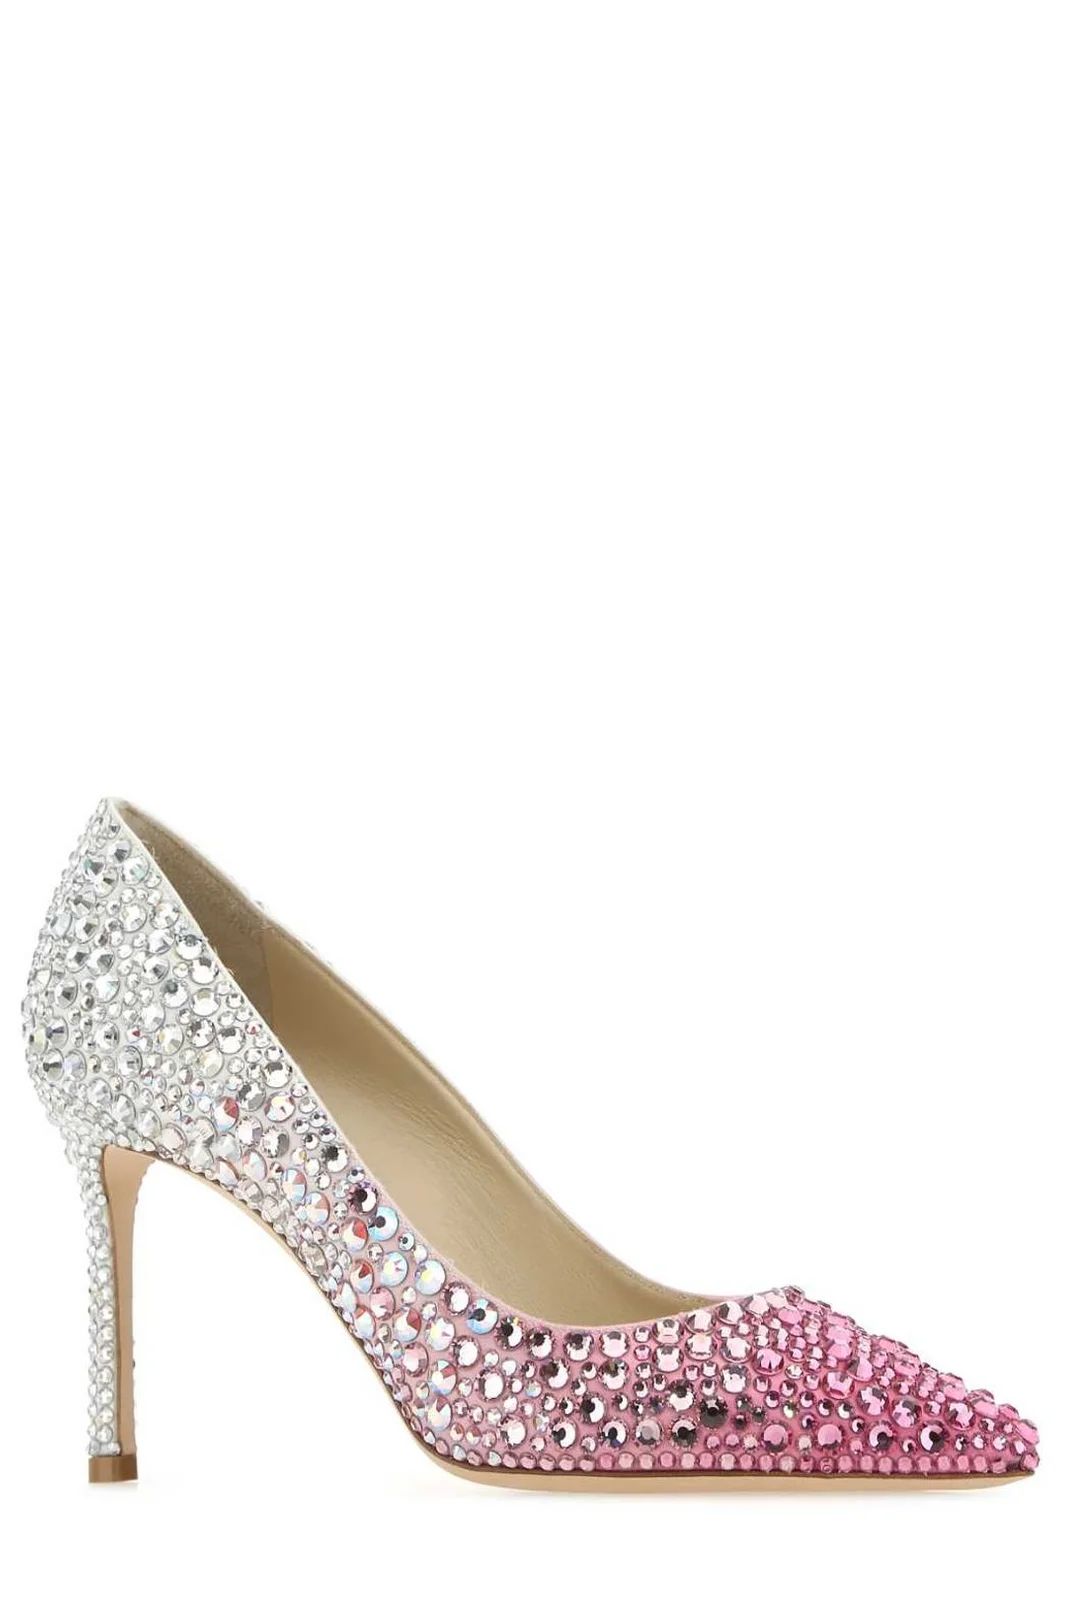 Jimmy Choo Romy Embellished Two-Toned Pumps | Cettire Global